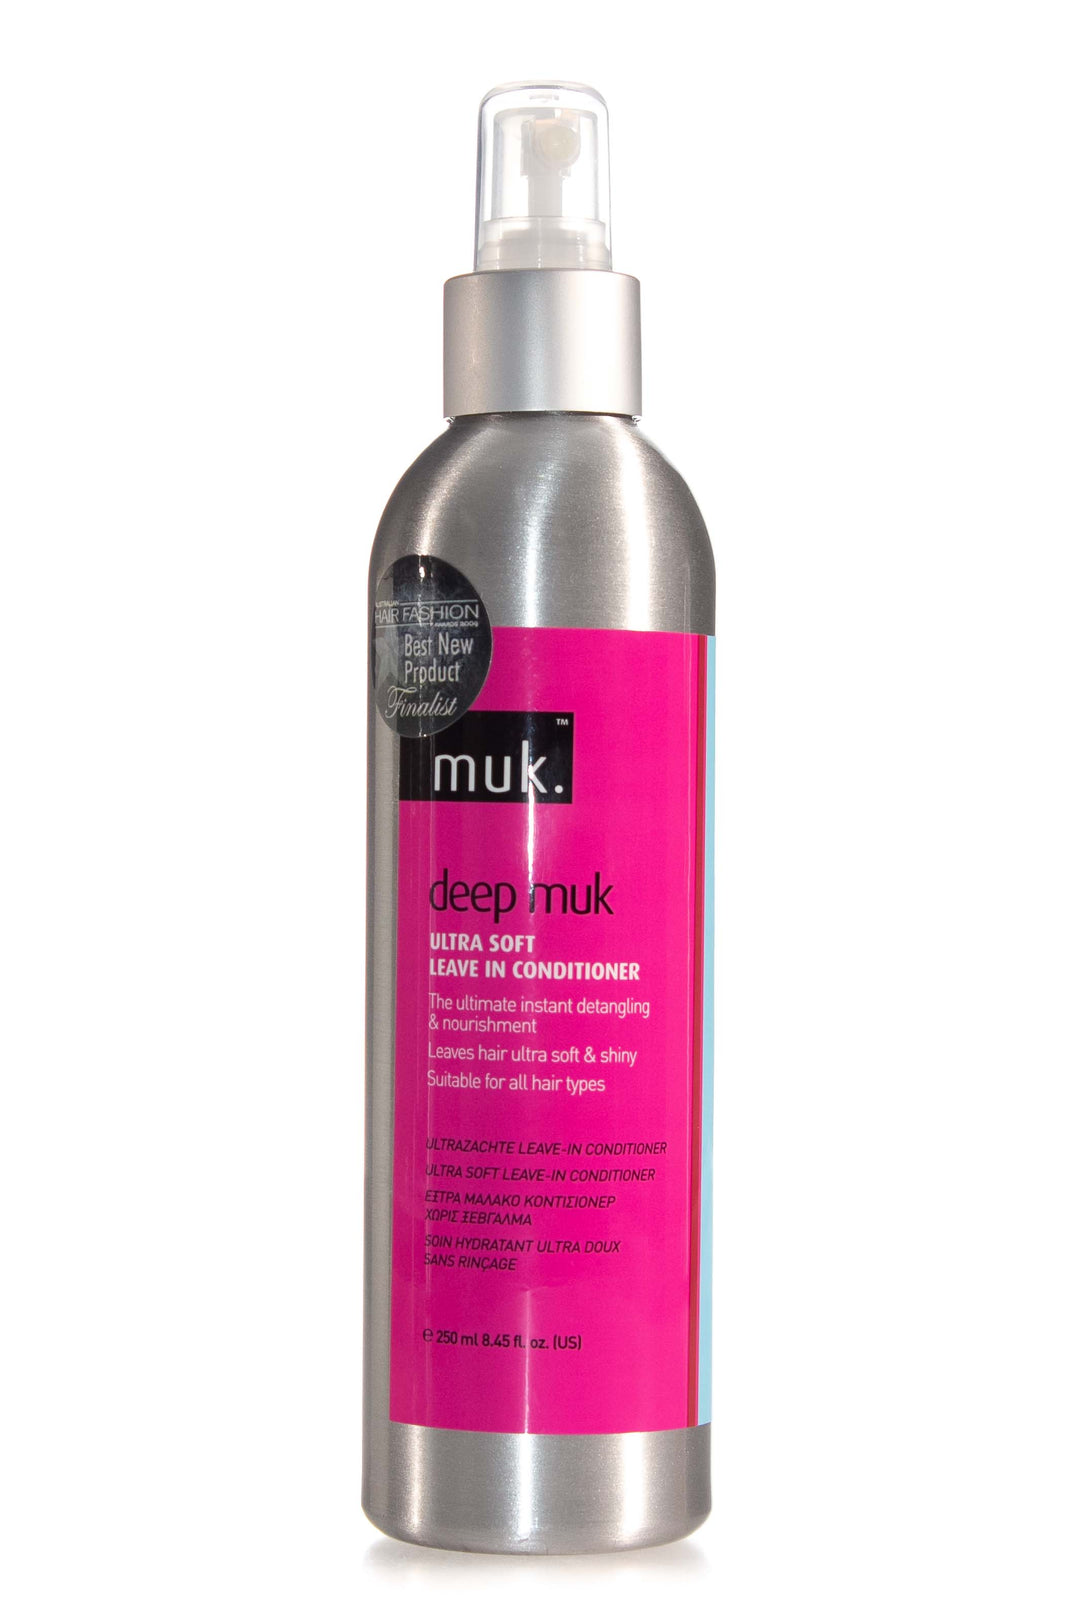 muk-deep-muk-ultra-soft-leave-in-conditioner-250ml